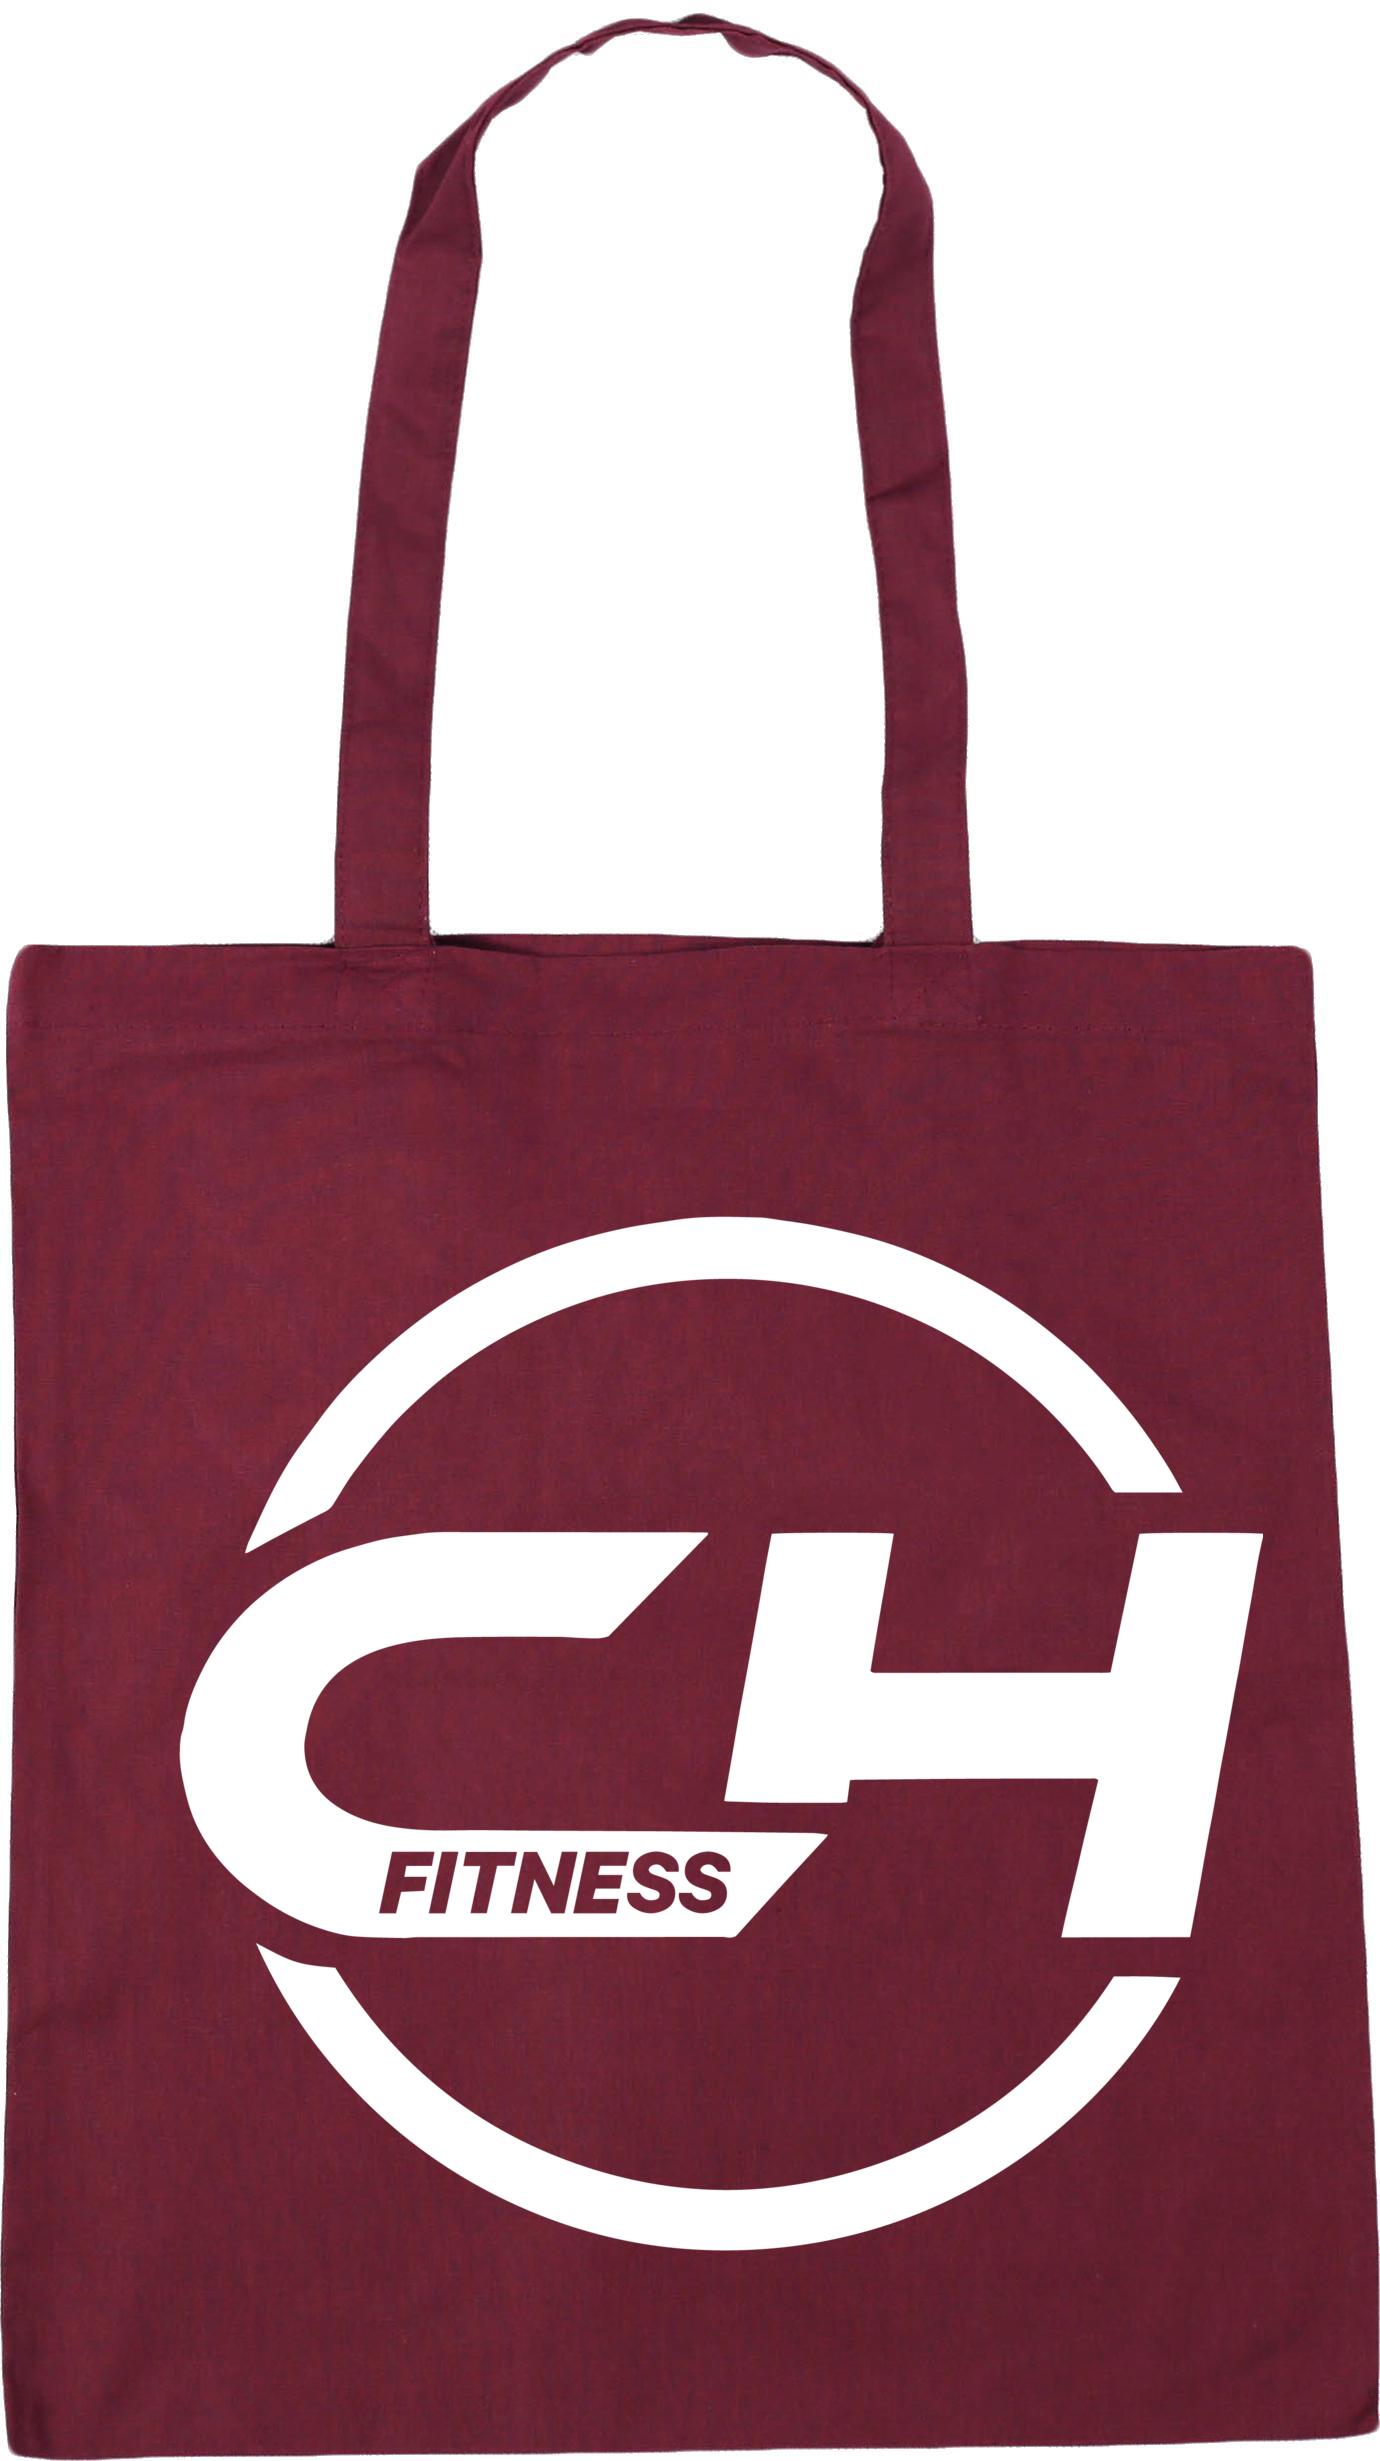 CH Fitness Tote Bag